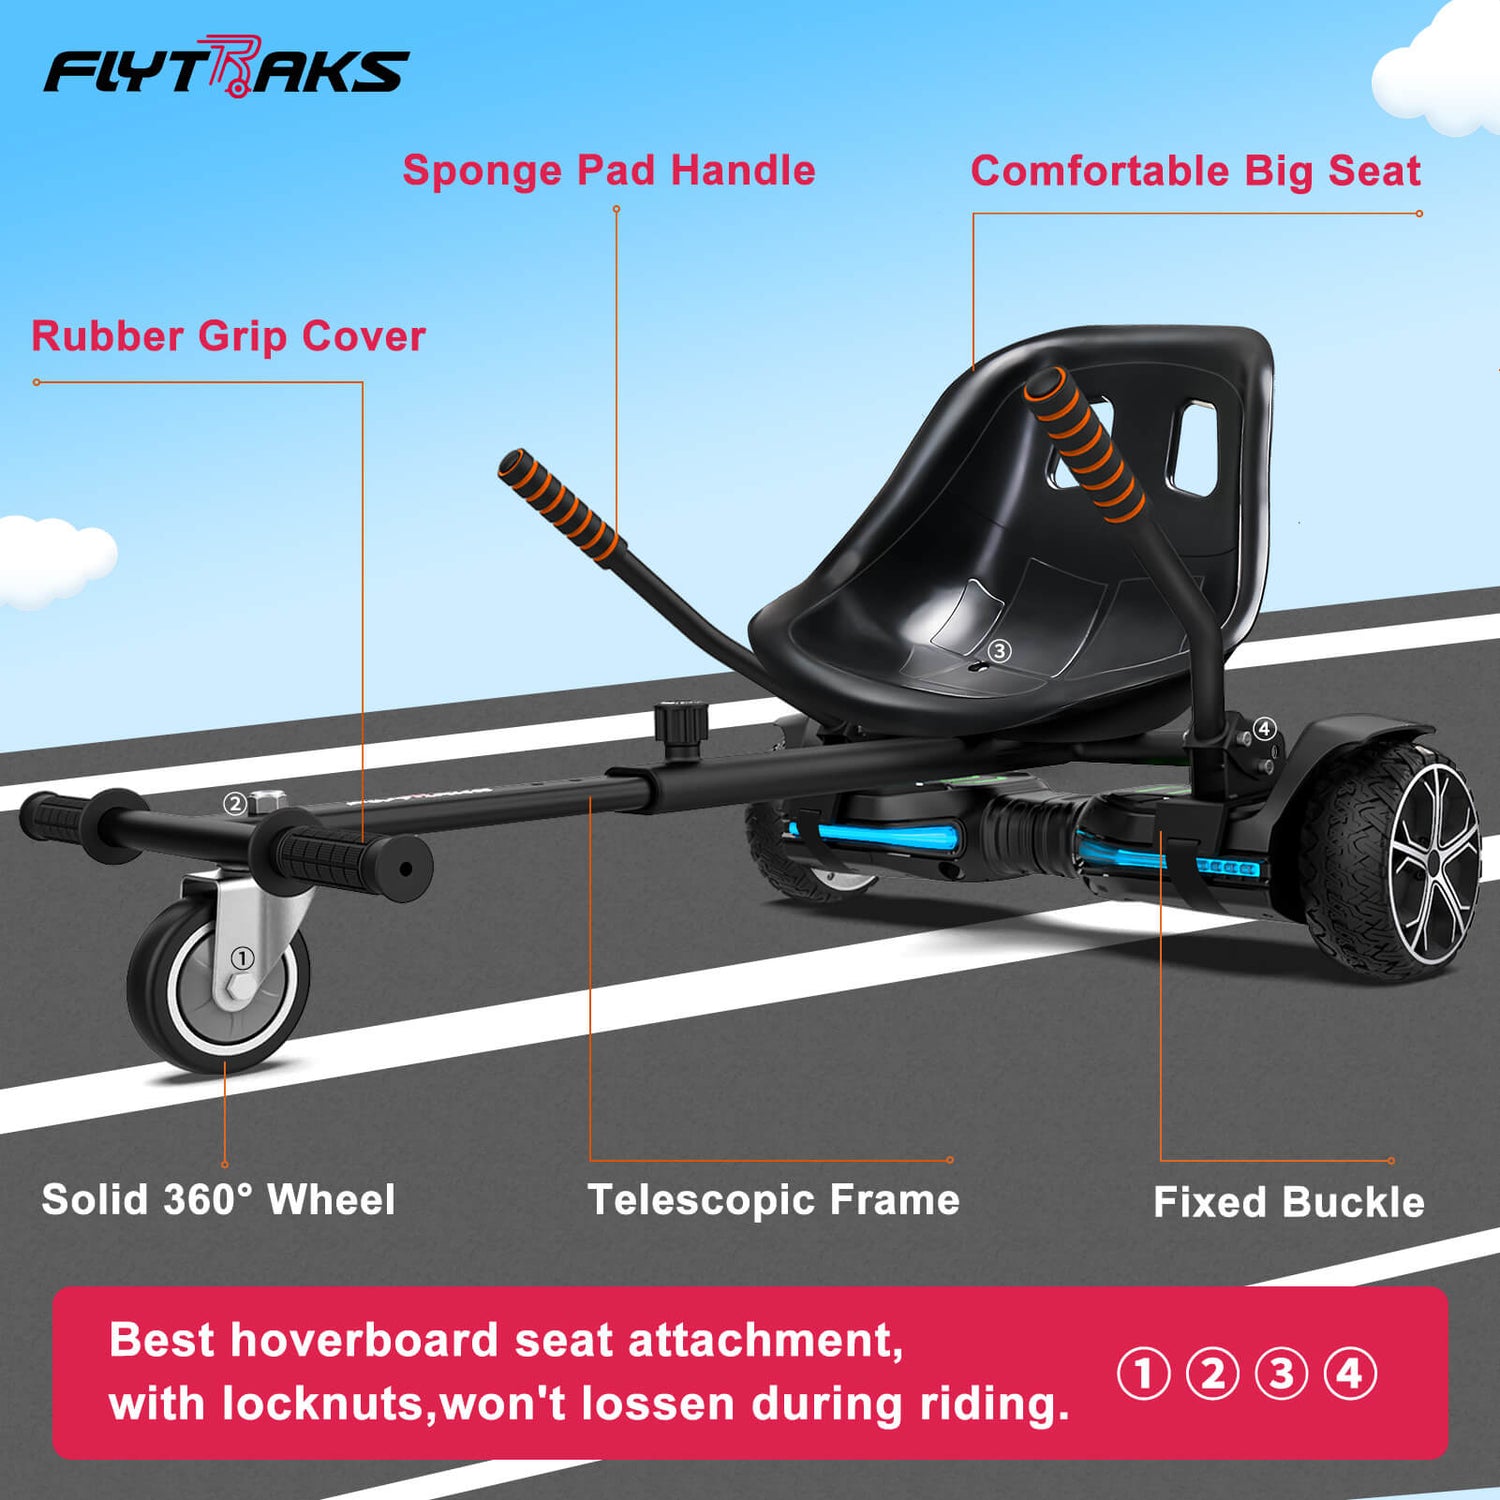 Hoverboard Kart Seat Attachment - Top Notch DFW, LLC